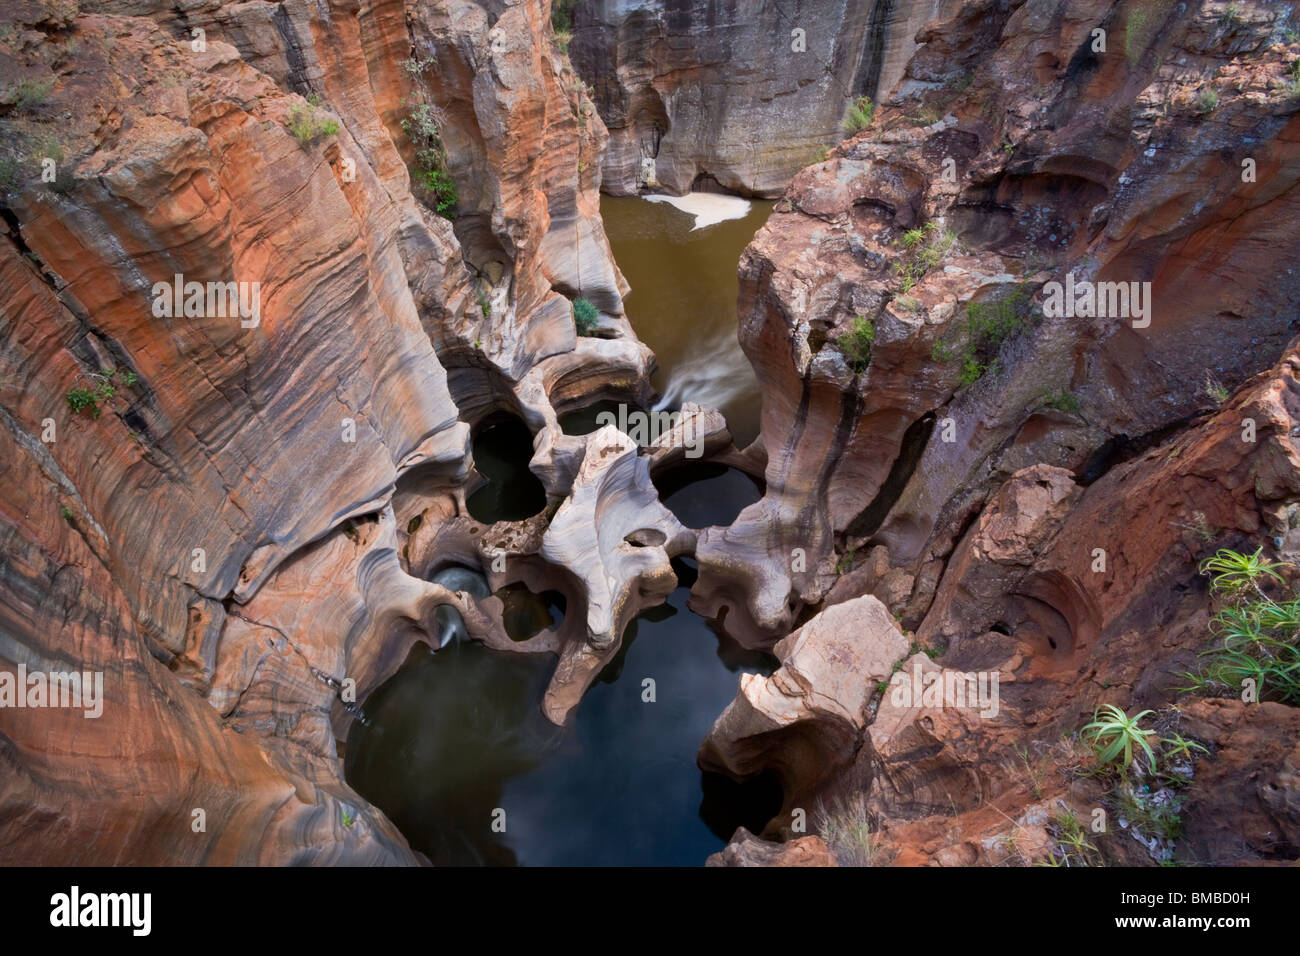 Treur River plunging through the Bourke’s Luck Potholes of Blyde River Canyon, South Africa Stock Photo